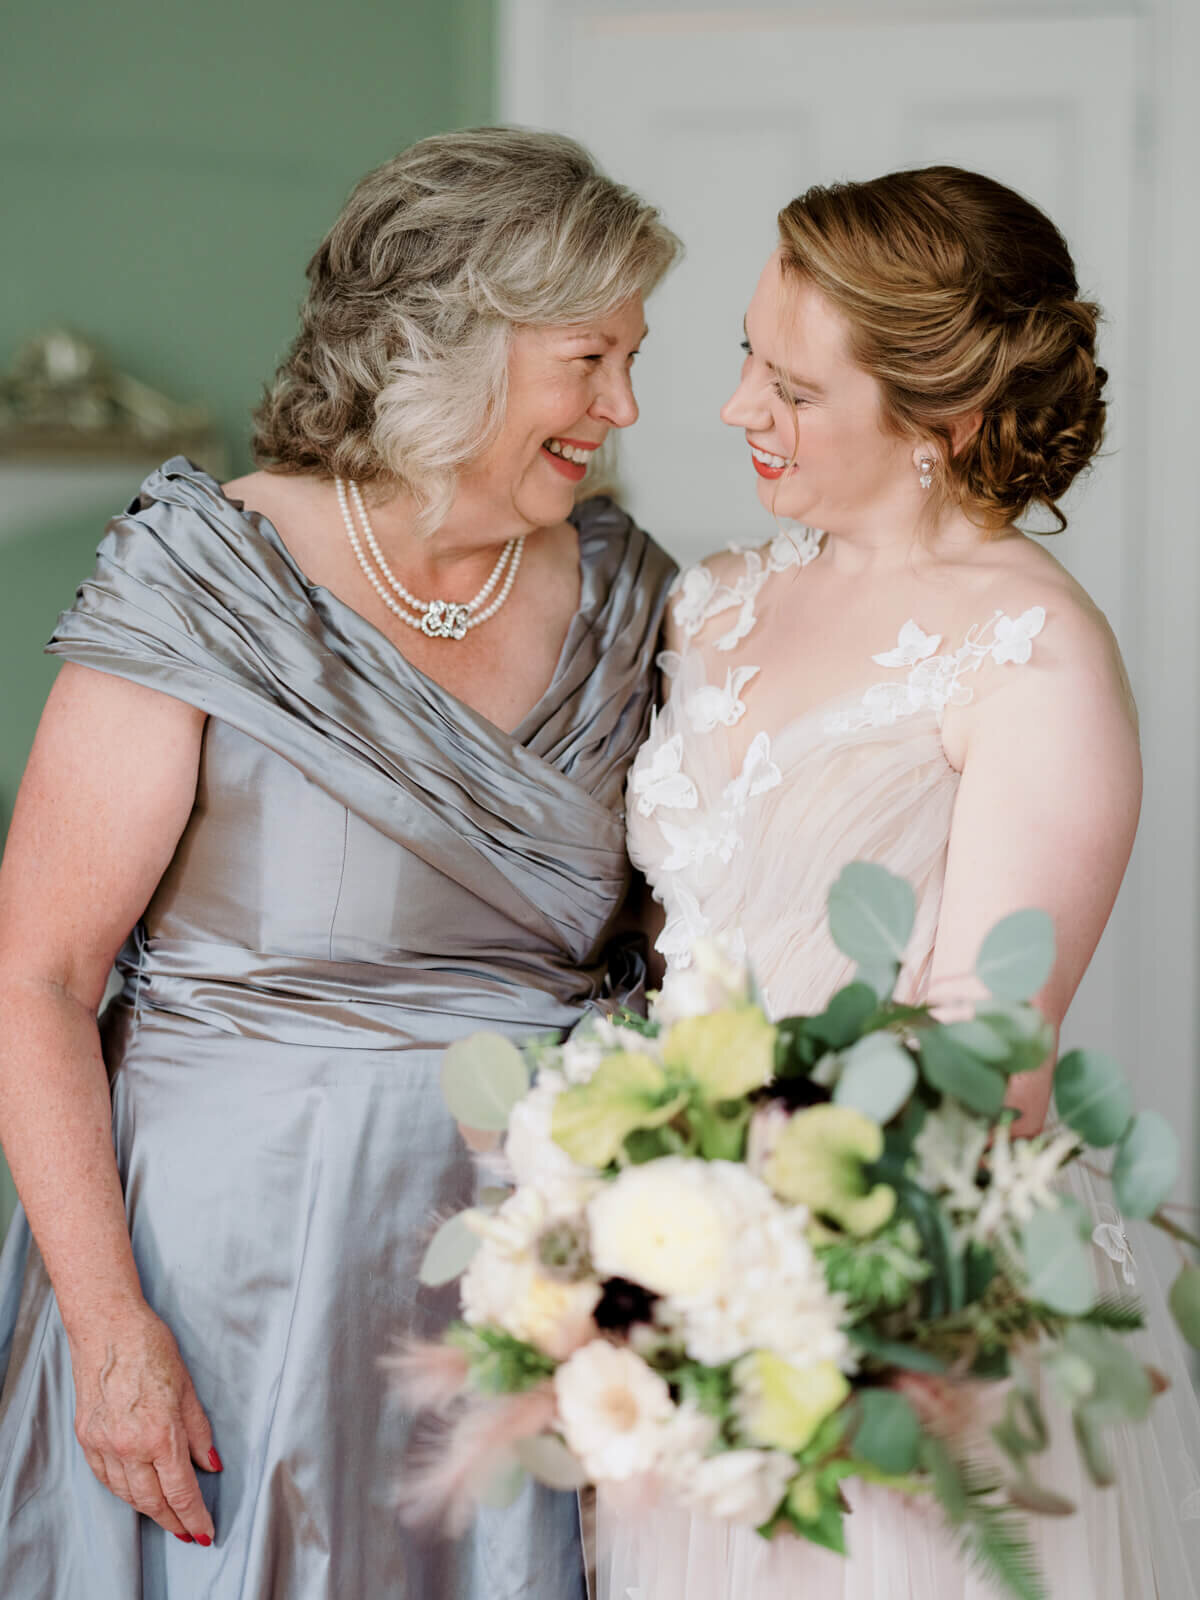 The bride, holding her flower bouquet, is standing side by side with an old lady while happily looking at each other.